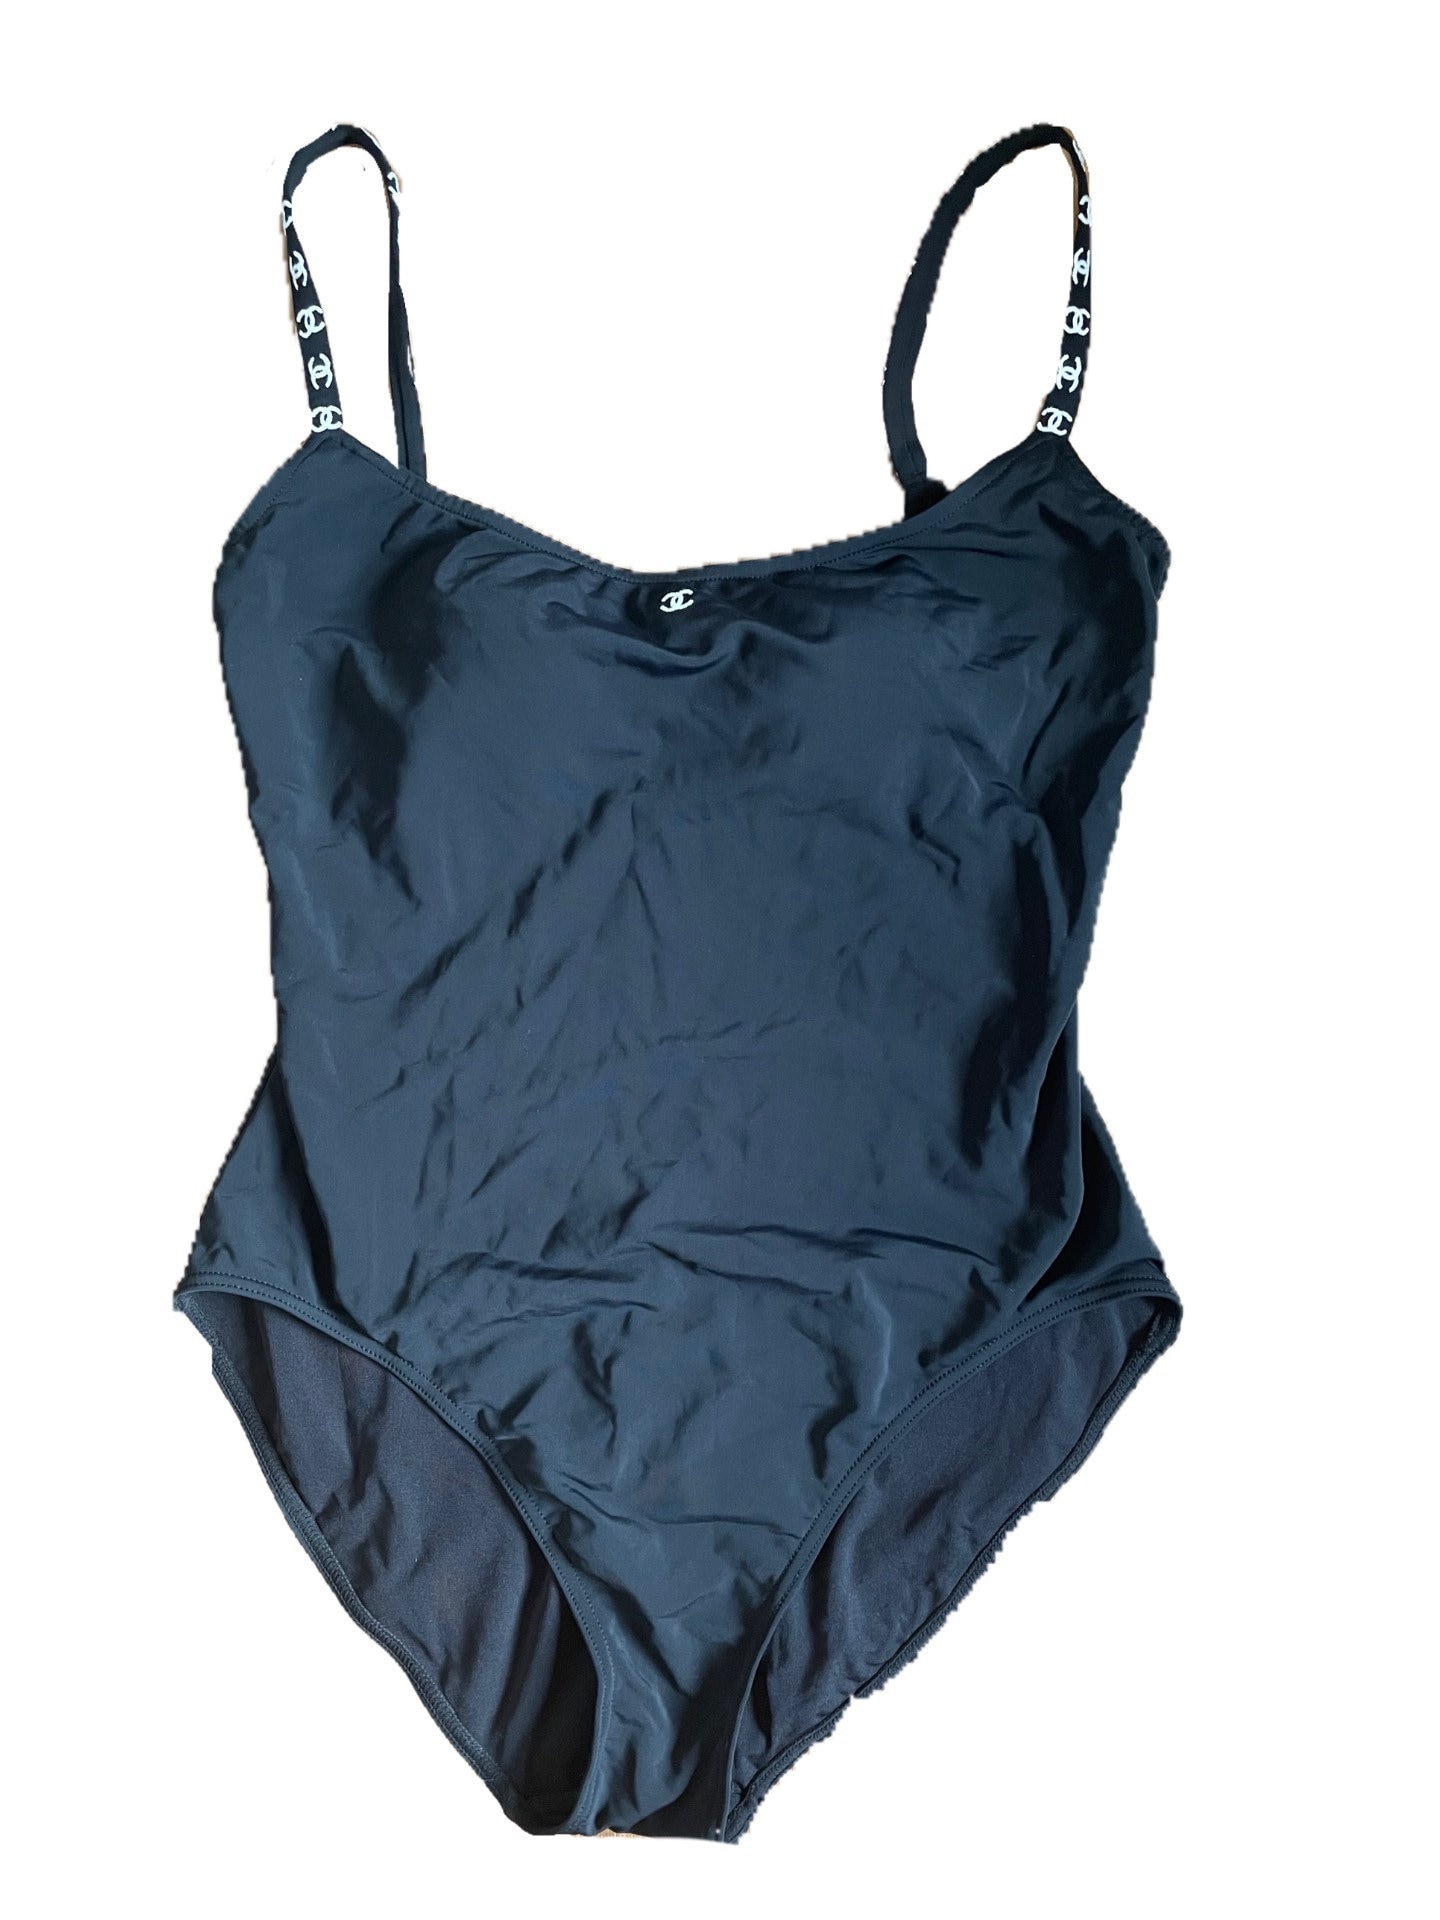 Buy Chanel Bathing Suit Online In India -  India